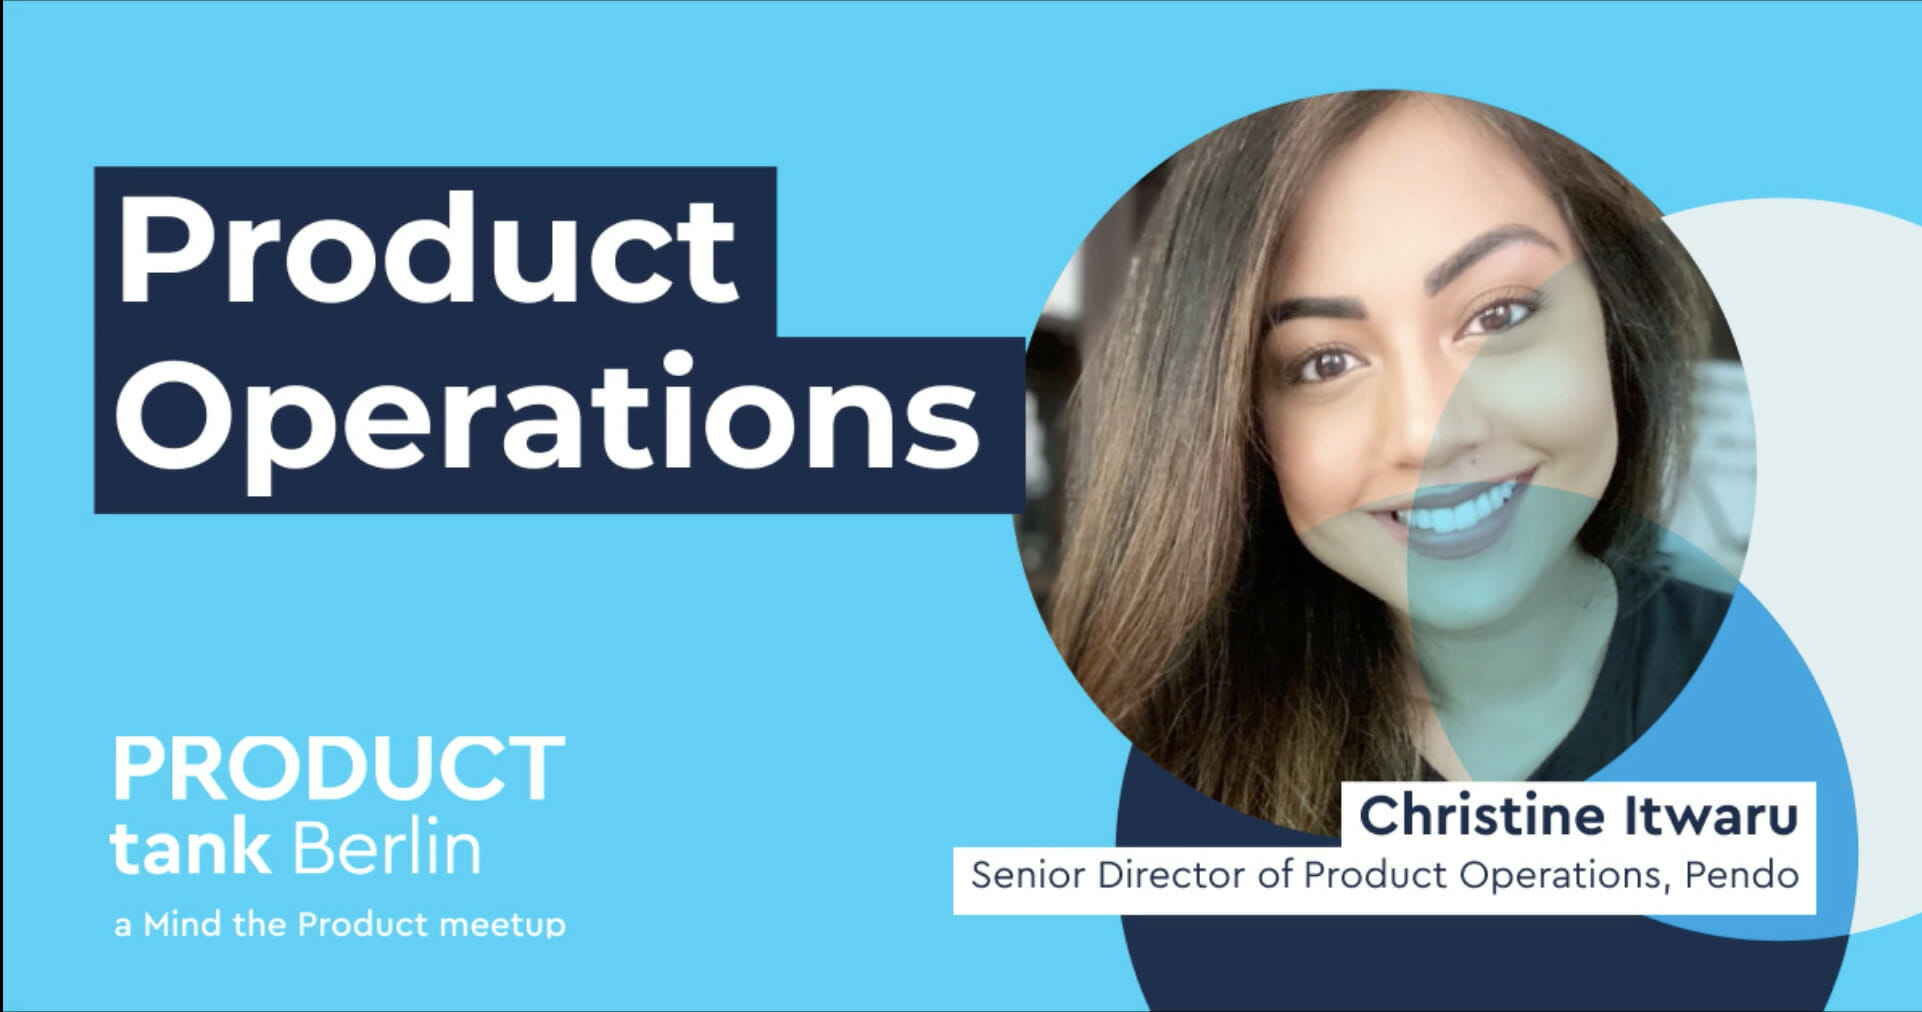 Product operations by Christine Itwaru